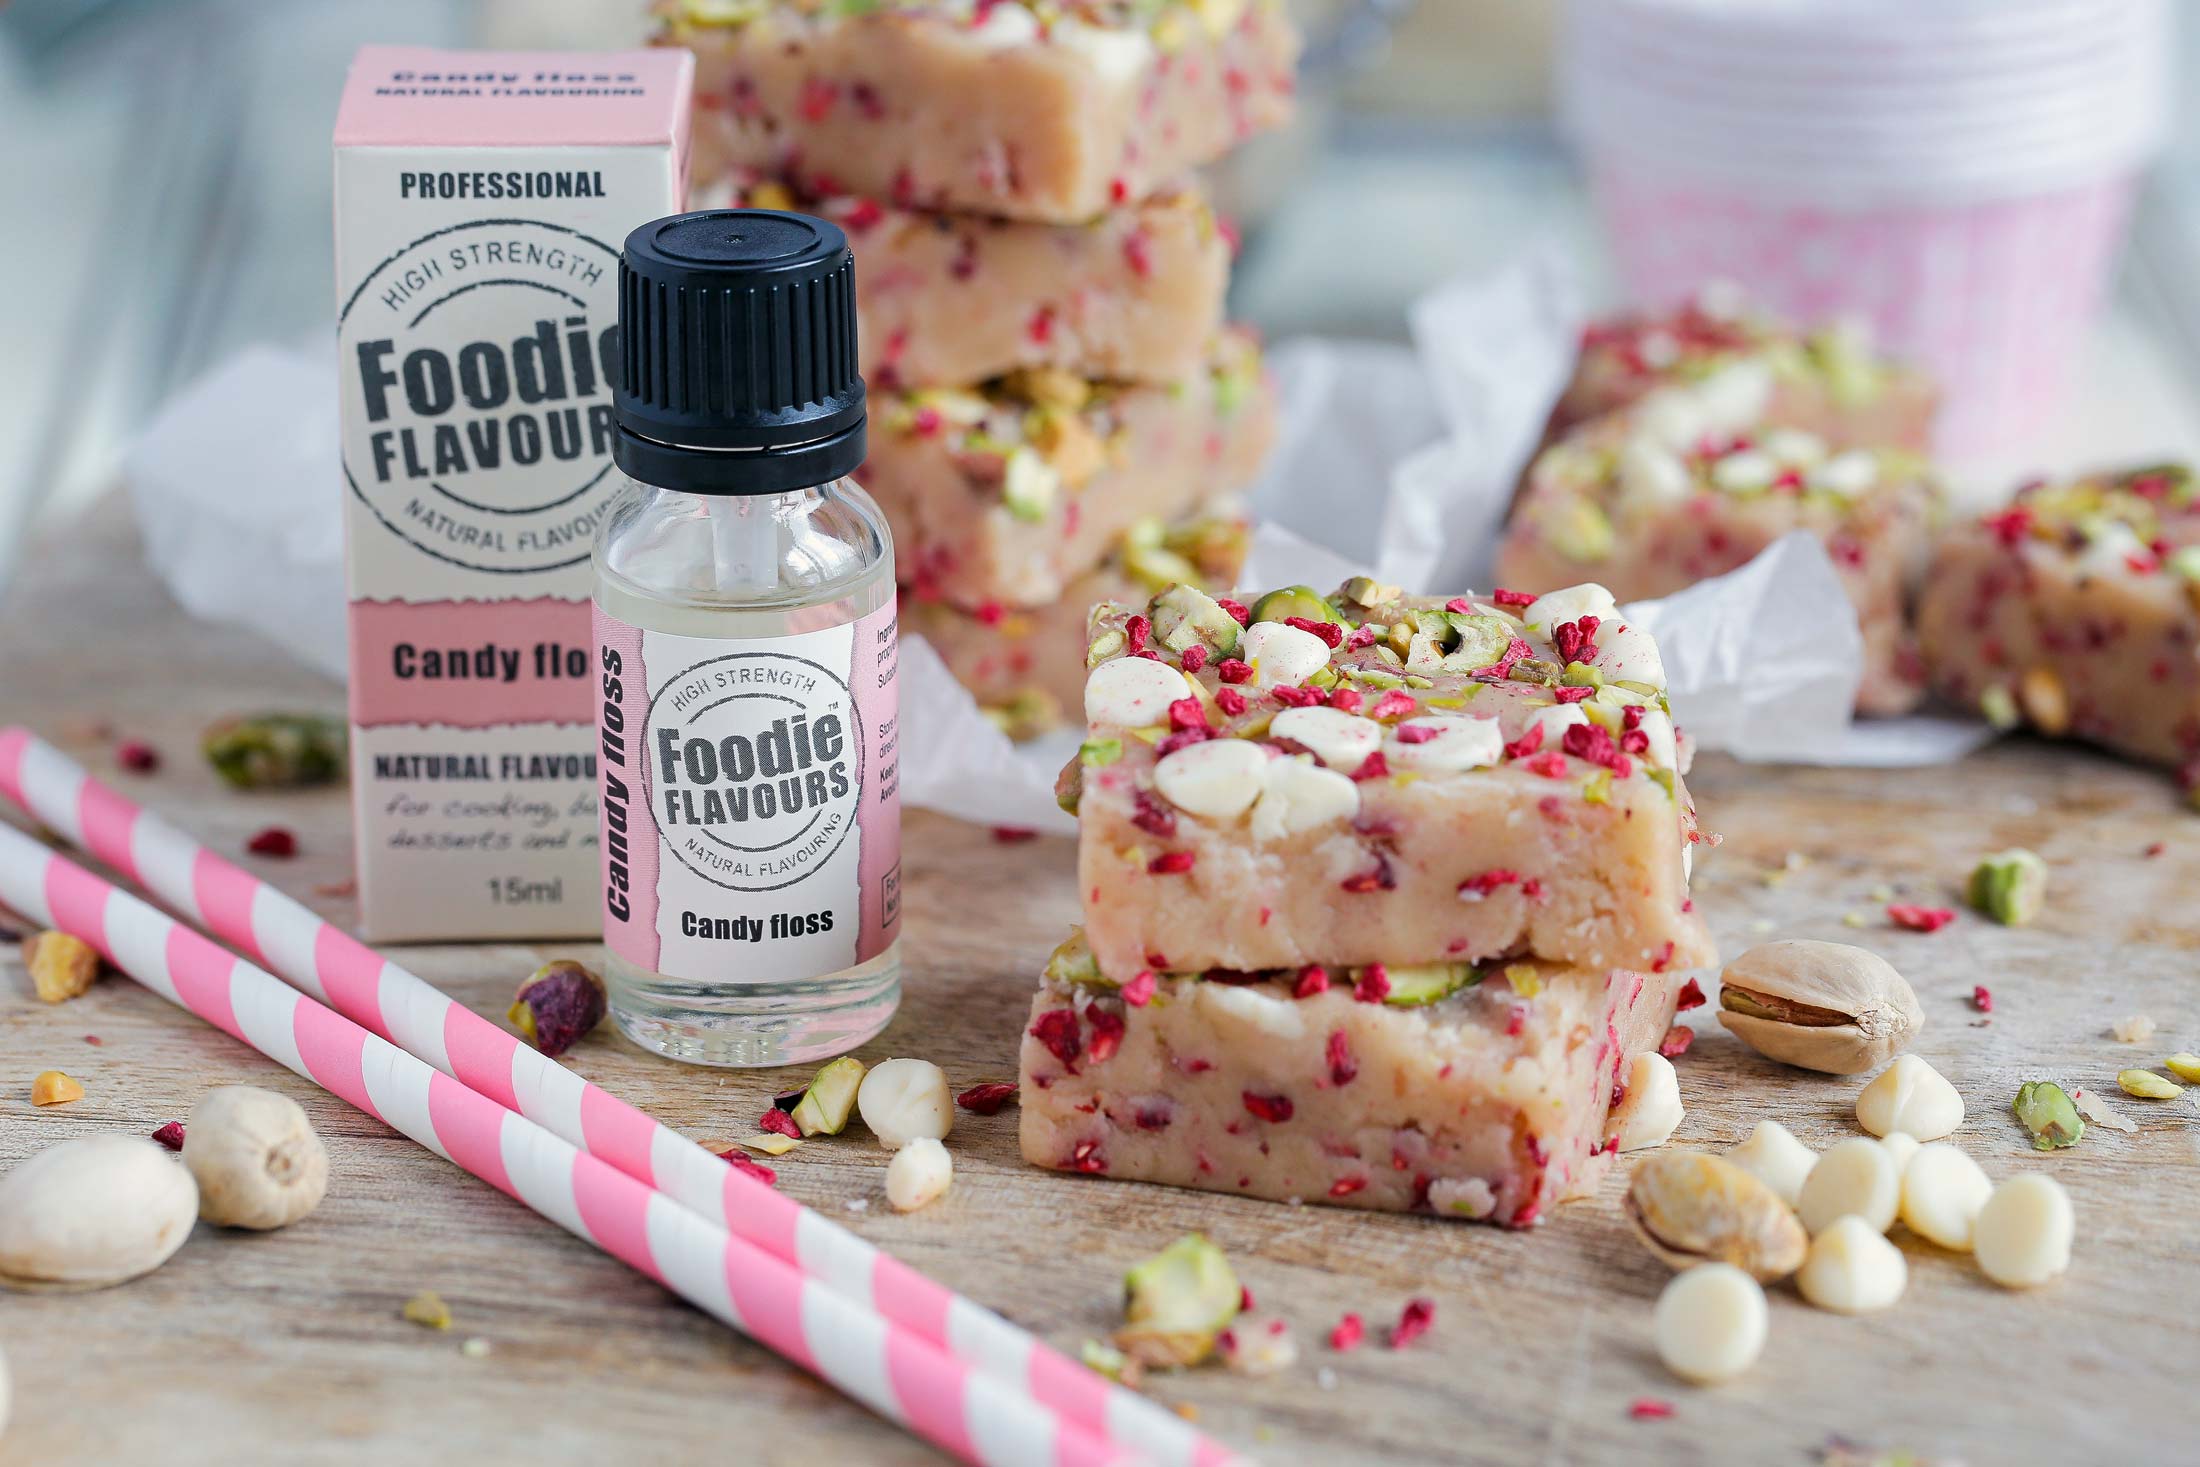 White Chocolate and Candy Floss Fudge